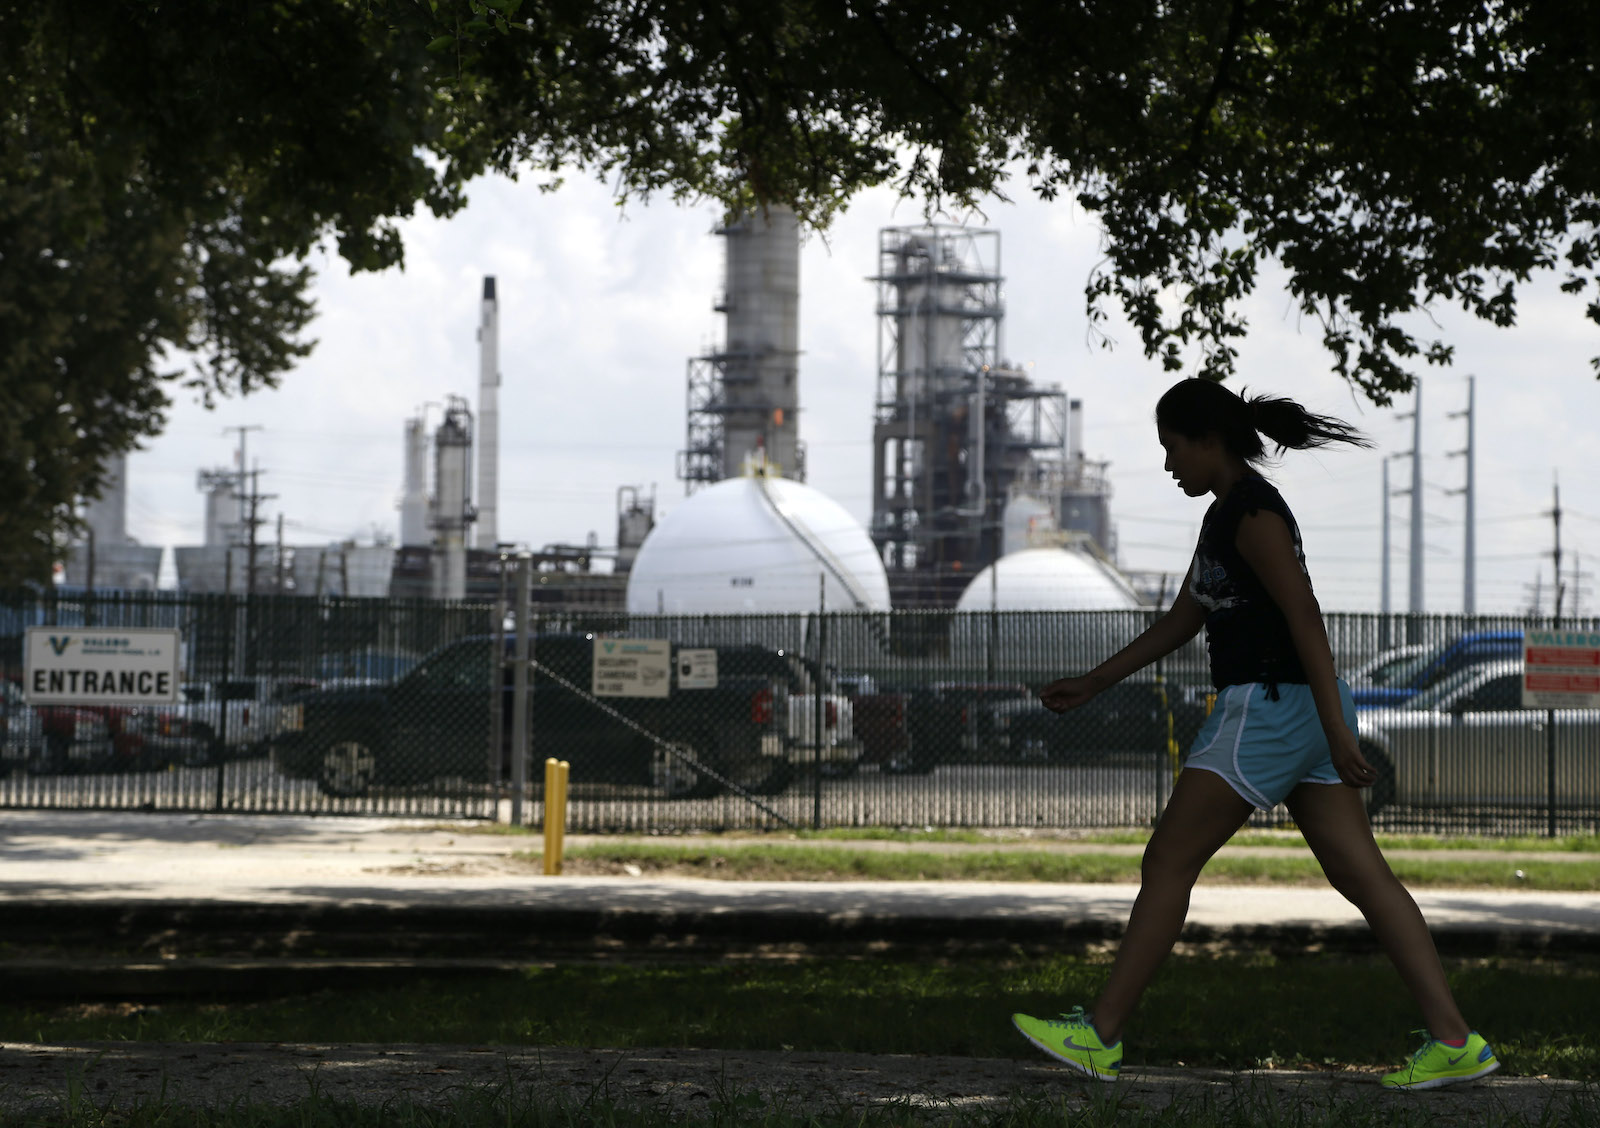 a girl walks in a park with an oil refinery in the background